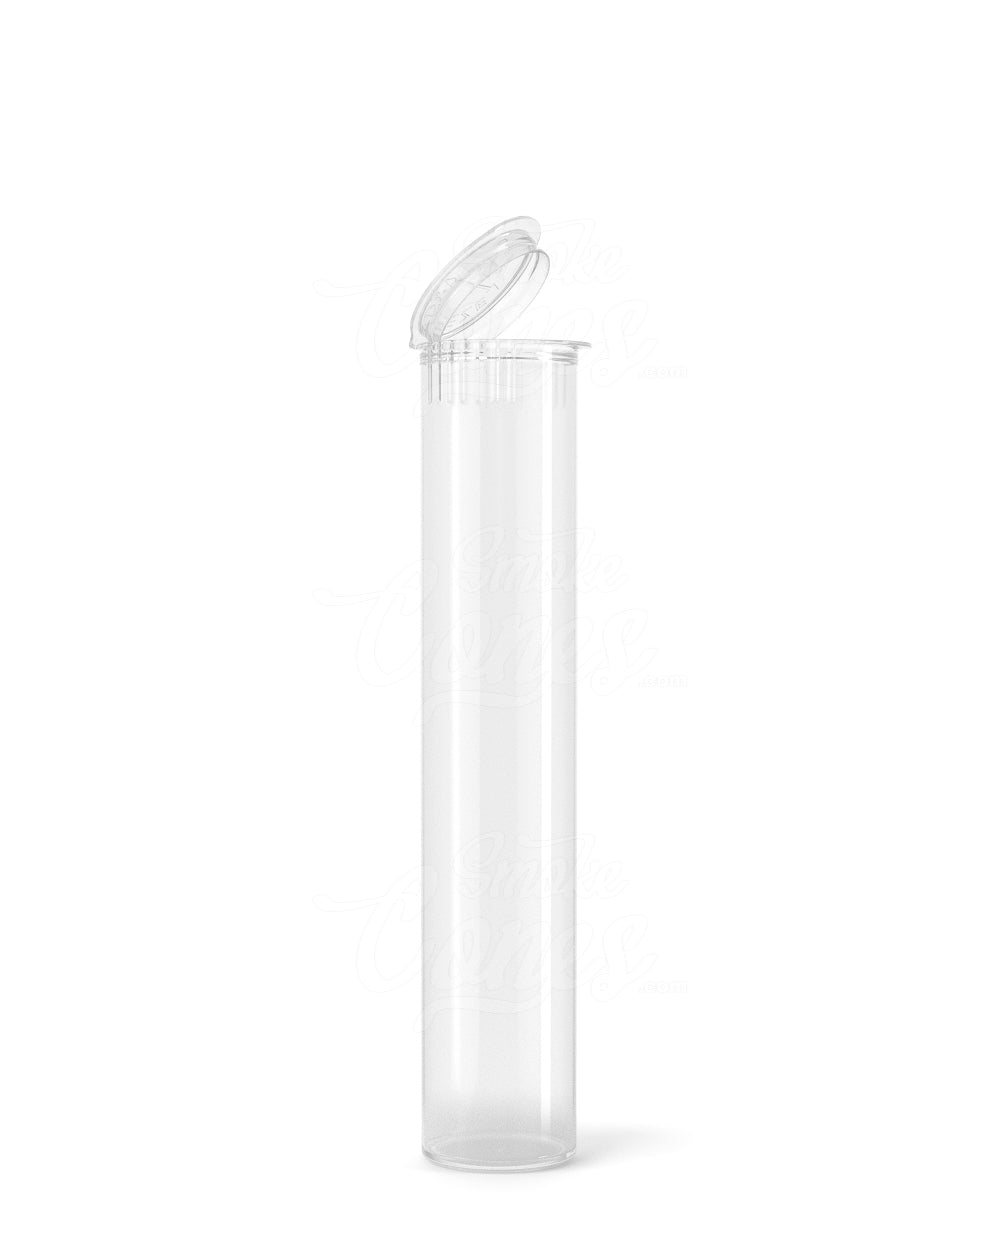 98mm Child Resistant Pop Top Clear Plastic Pre-Roll Tubes 1000/Box - 1